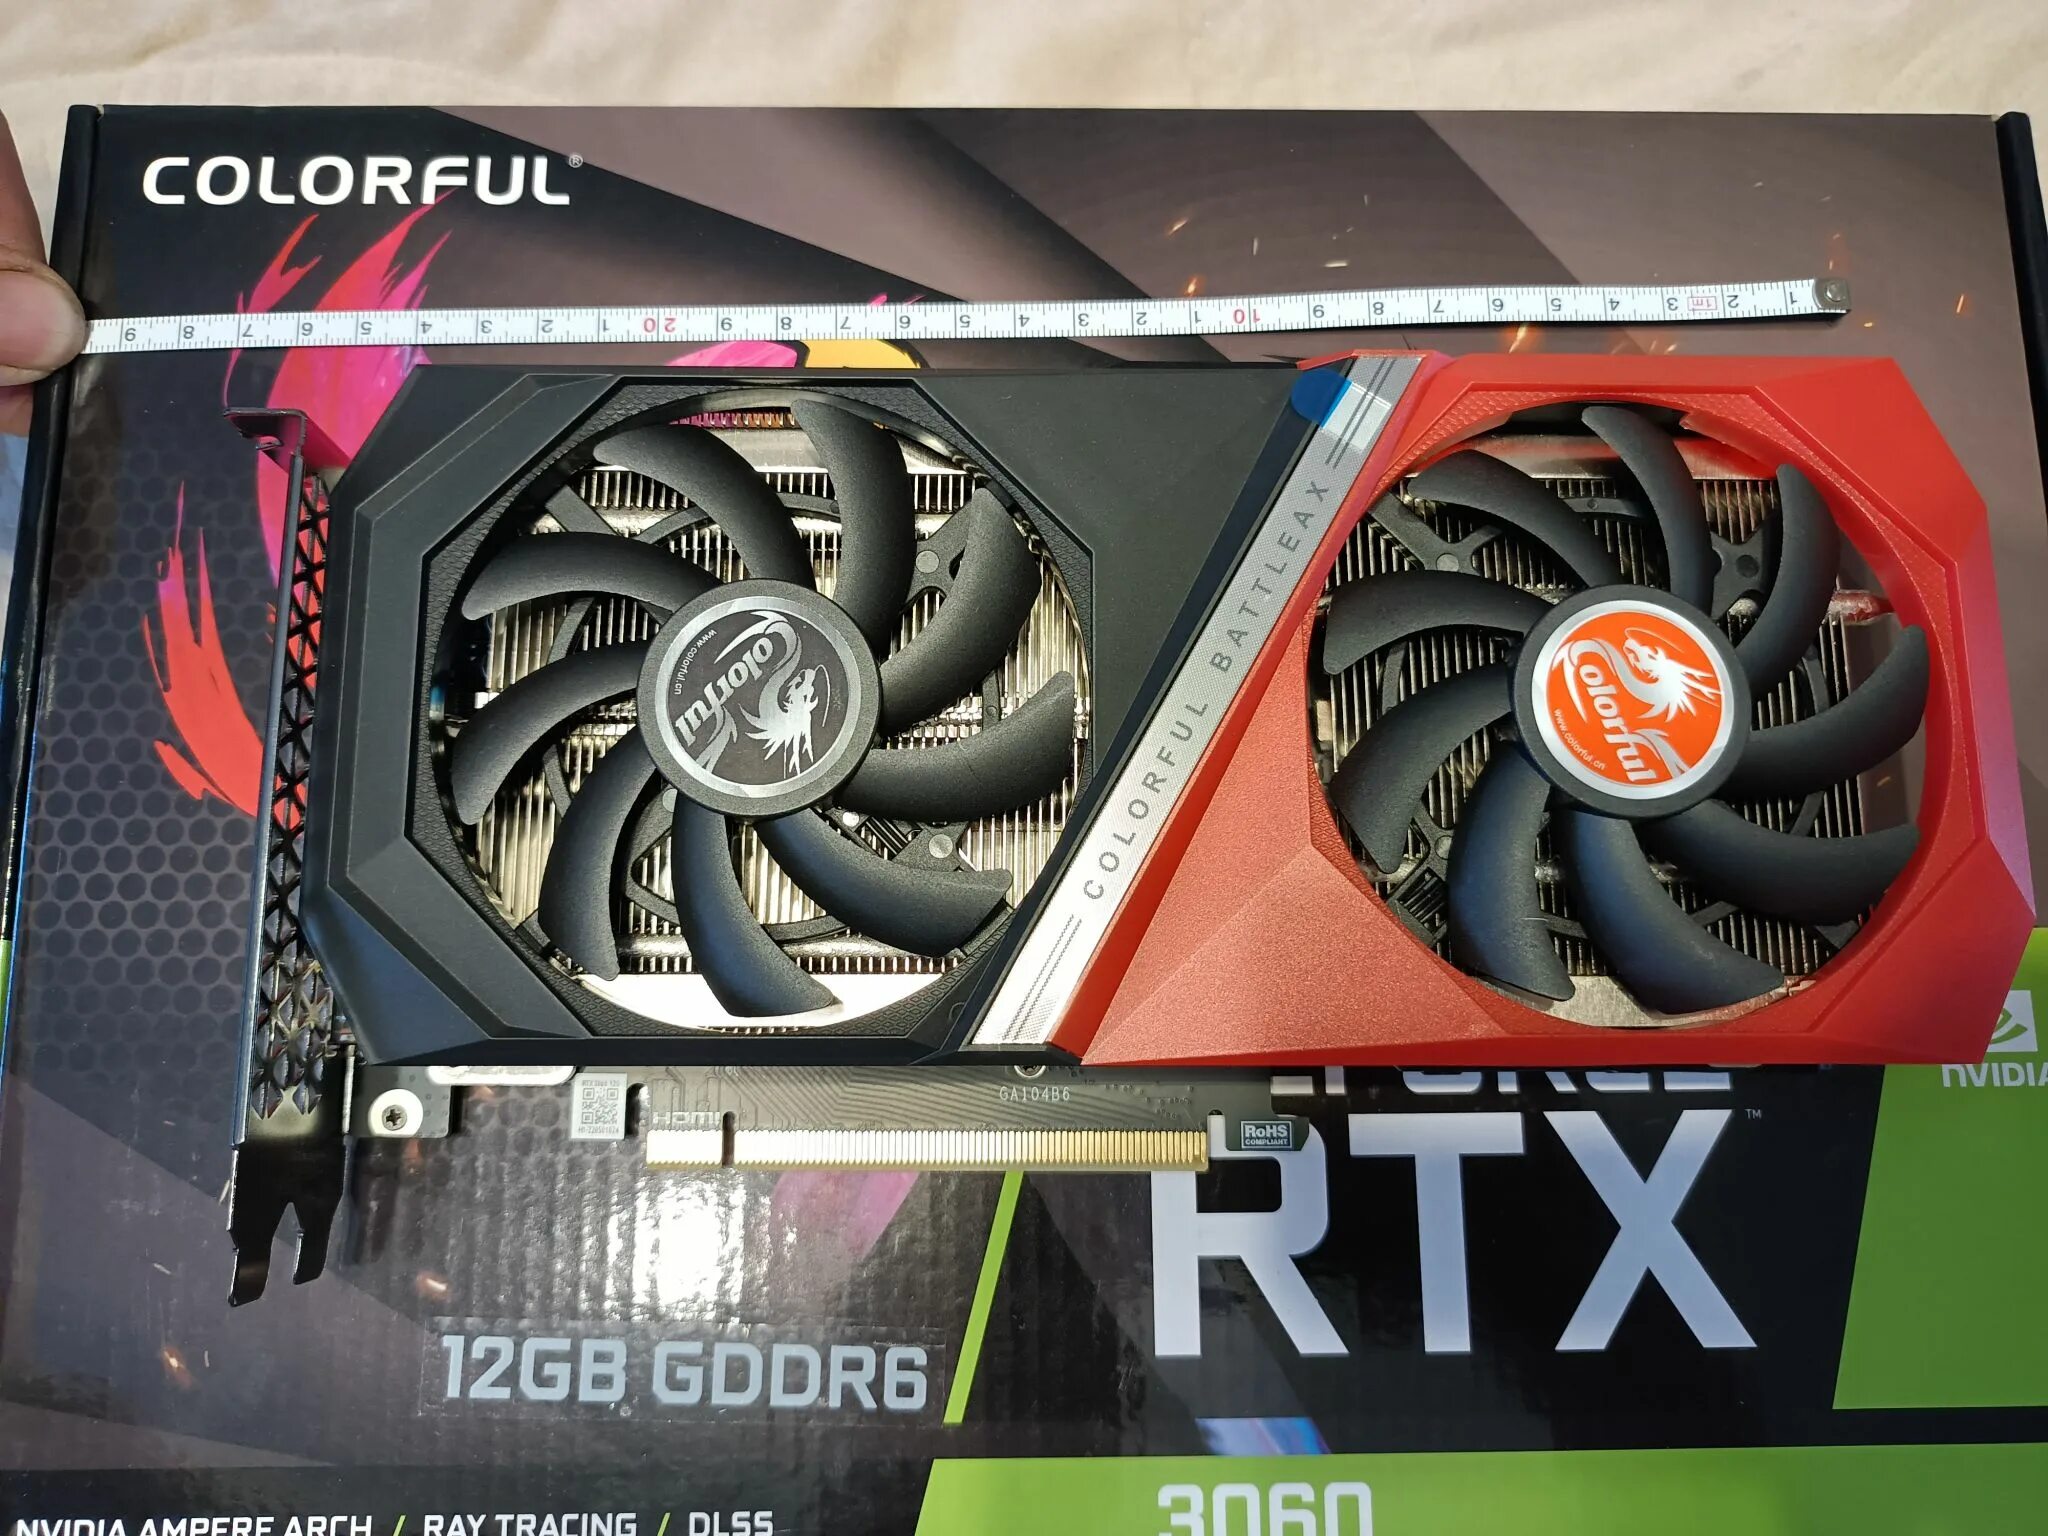 Rtx 3060 12g купить. RTX 3060 NB Duo 12g v2 l-v. RTX 3060 colorful NB Duo 12g. Colorful GEFORCE RTX 3060 NB Duo. Colorful rtx3060 NB Duo 12g v2.